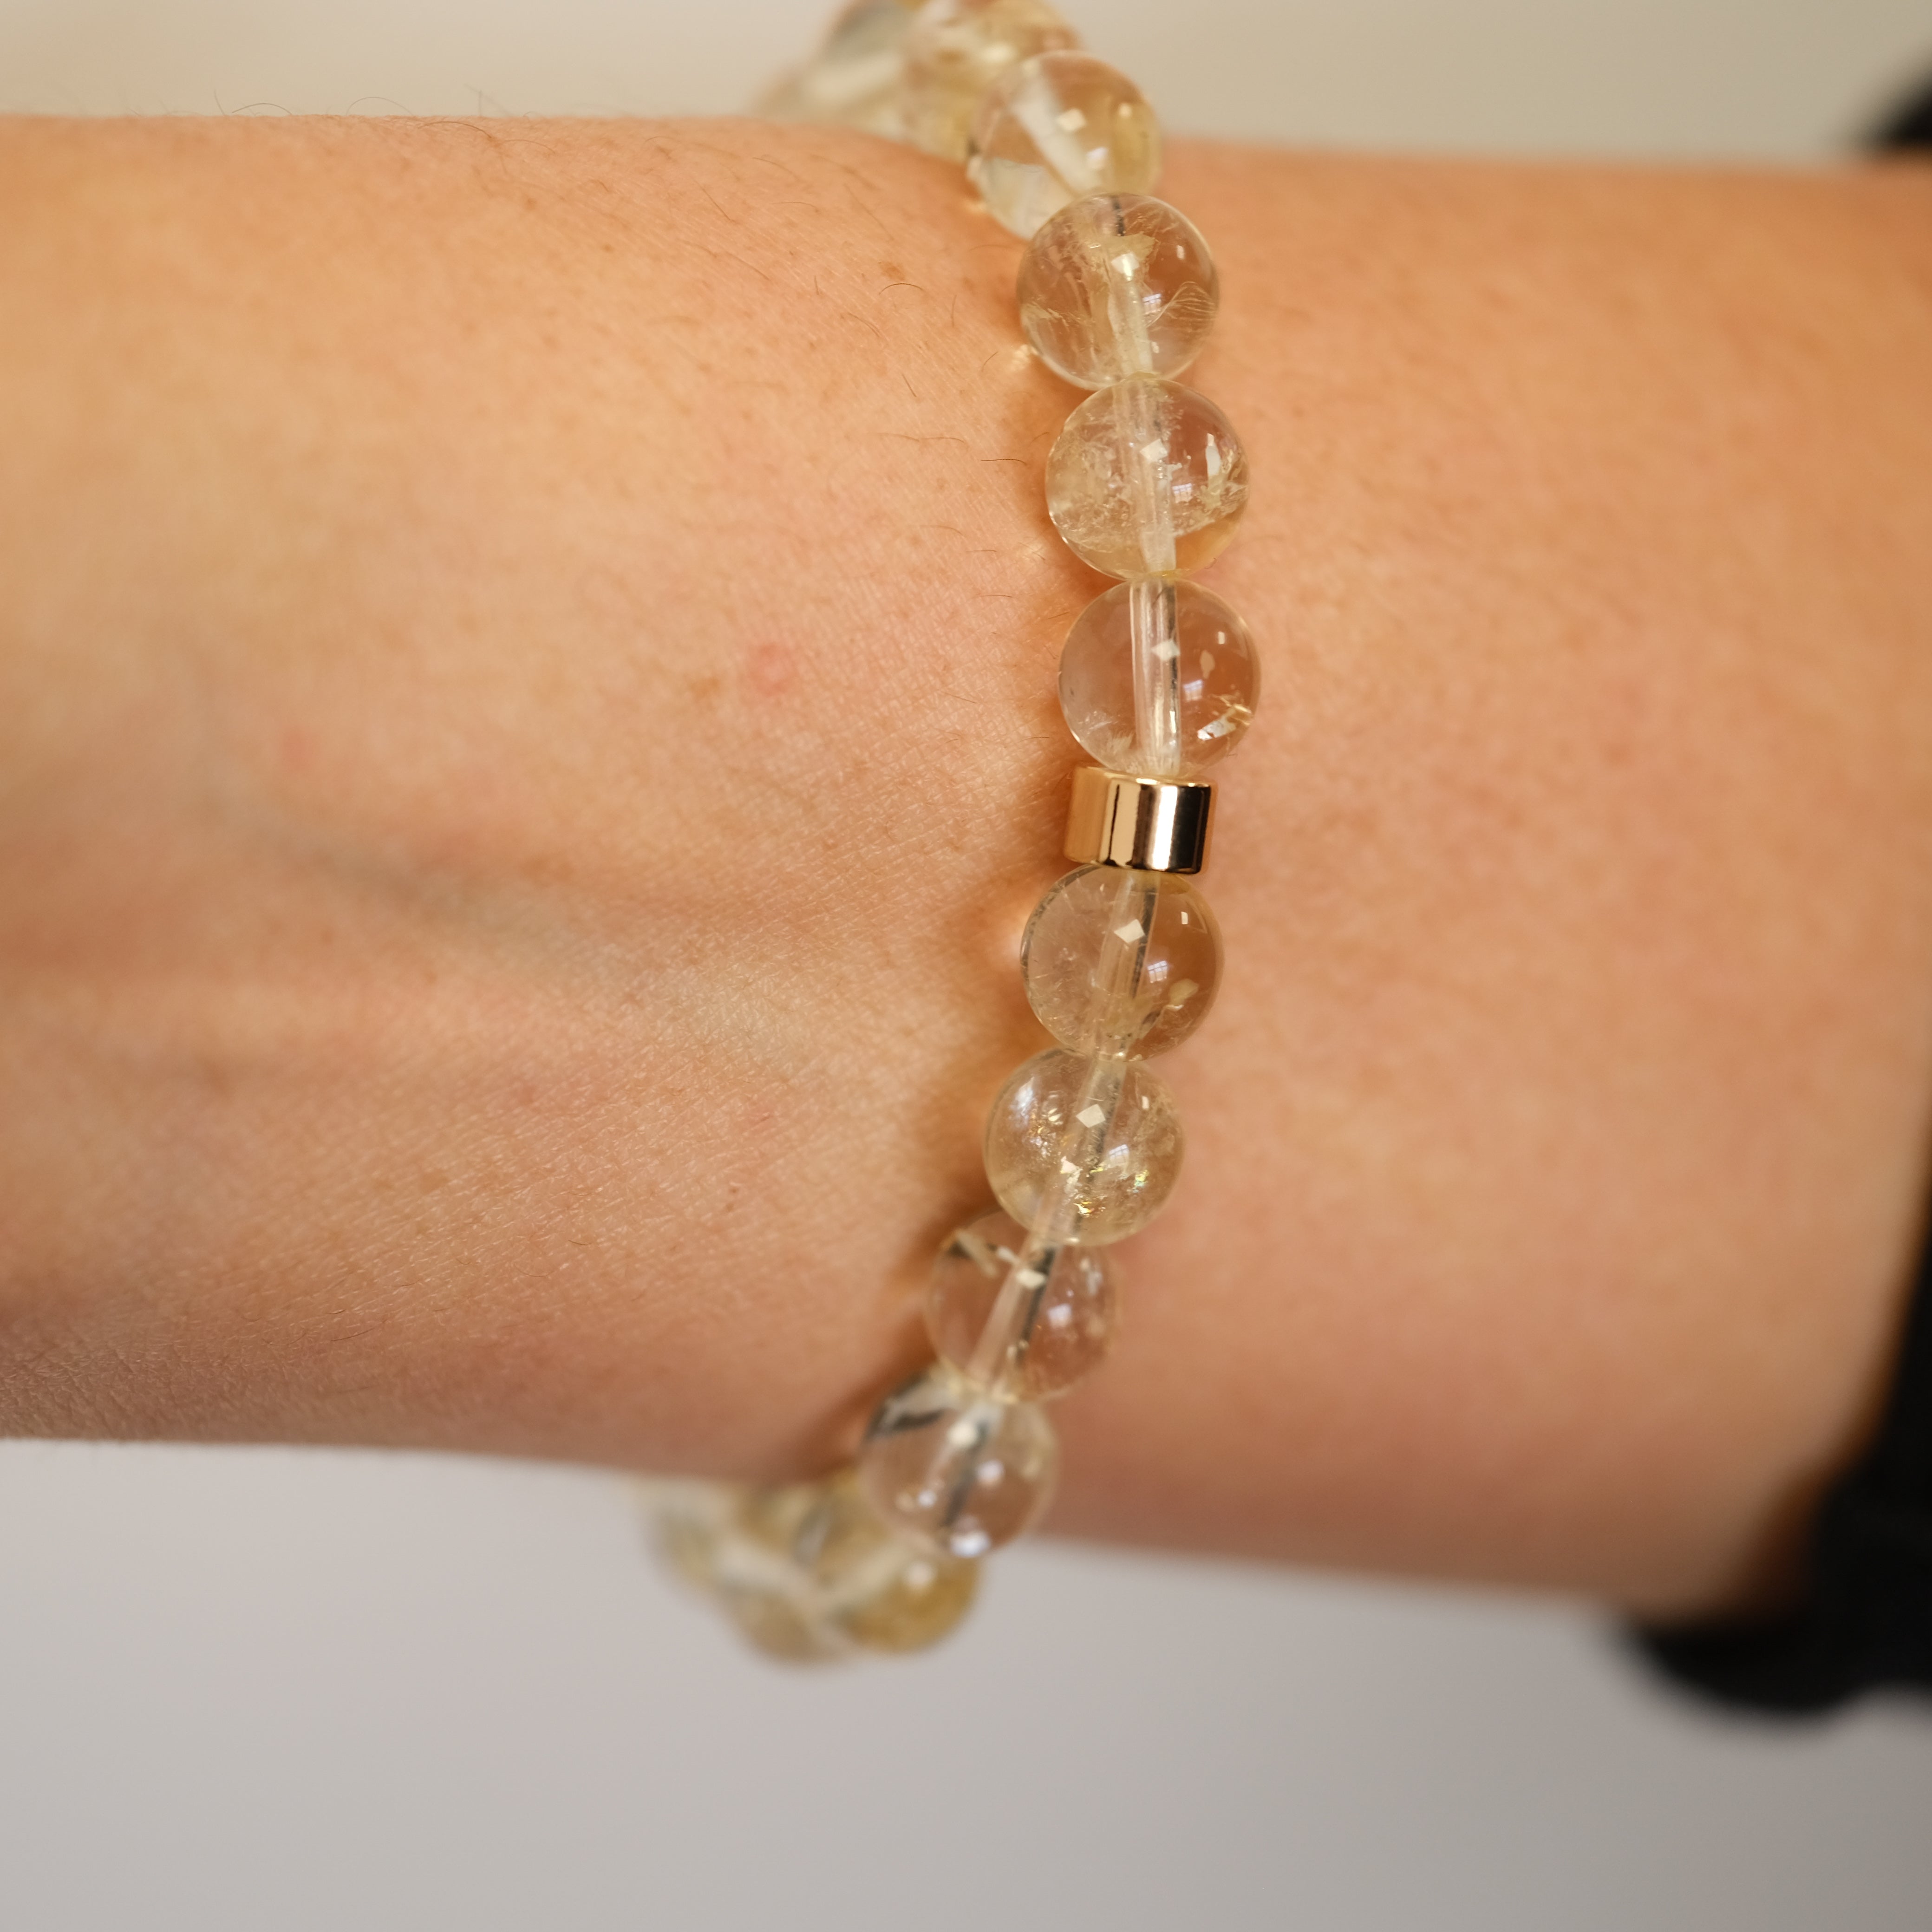 Citrine gemstone bracelet with gold accessories worn on a model's wrist from the back